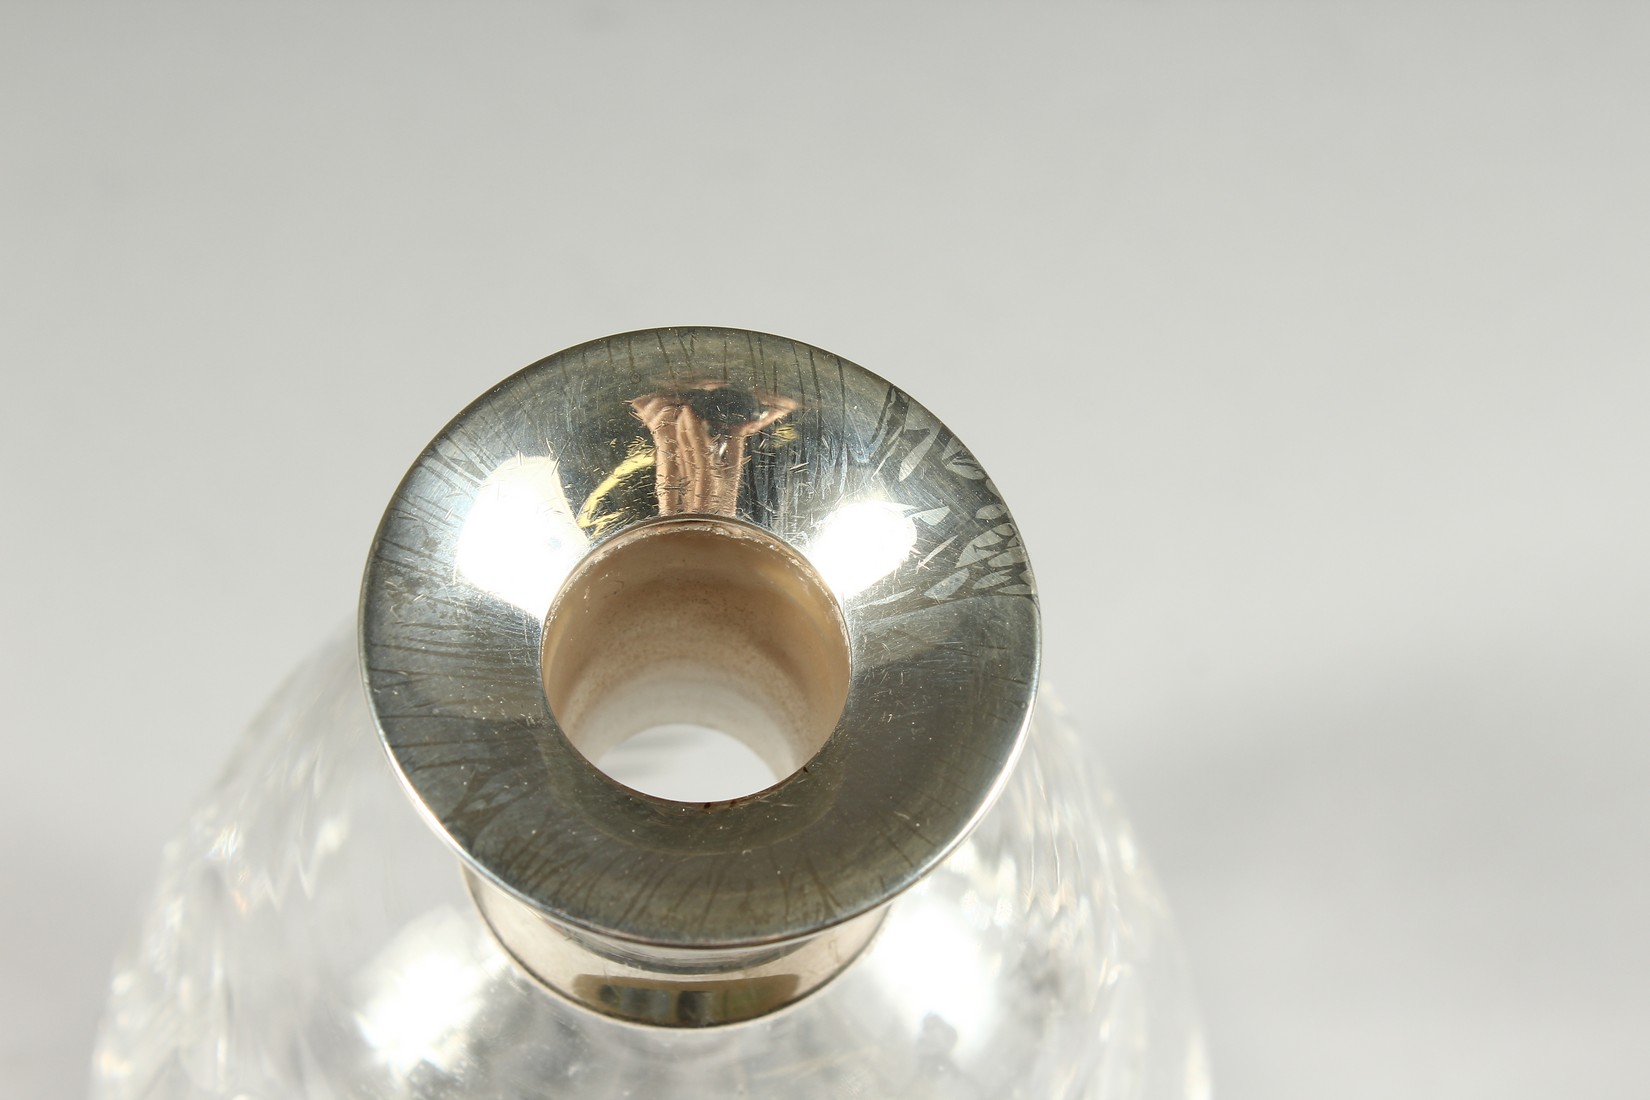 AN ASPREY CUT GLASS DECANTER AND STOPPER with silver band. - Image 5 of 5